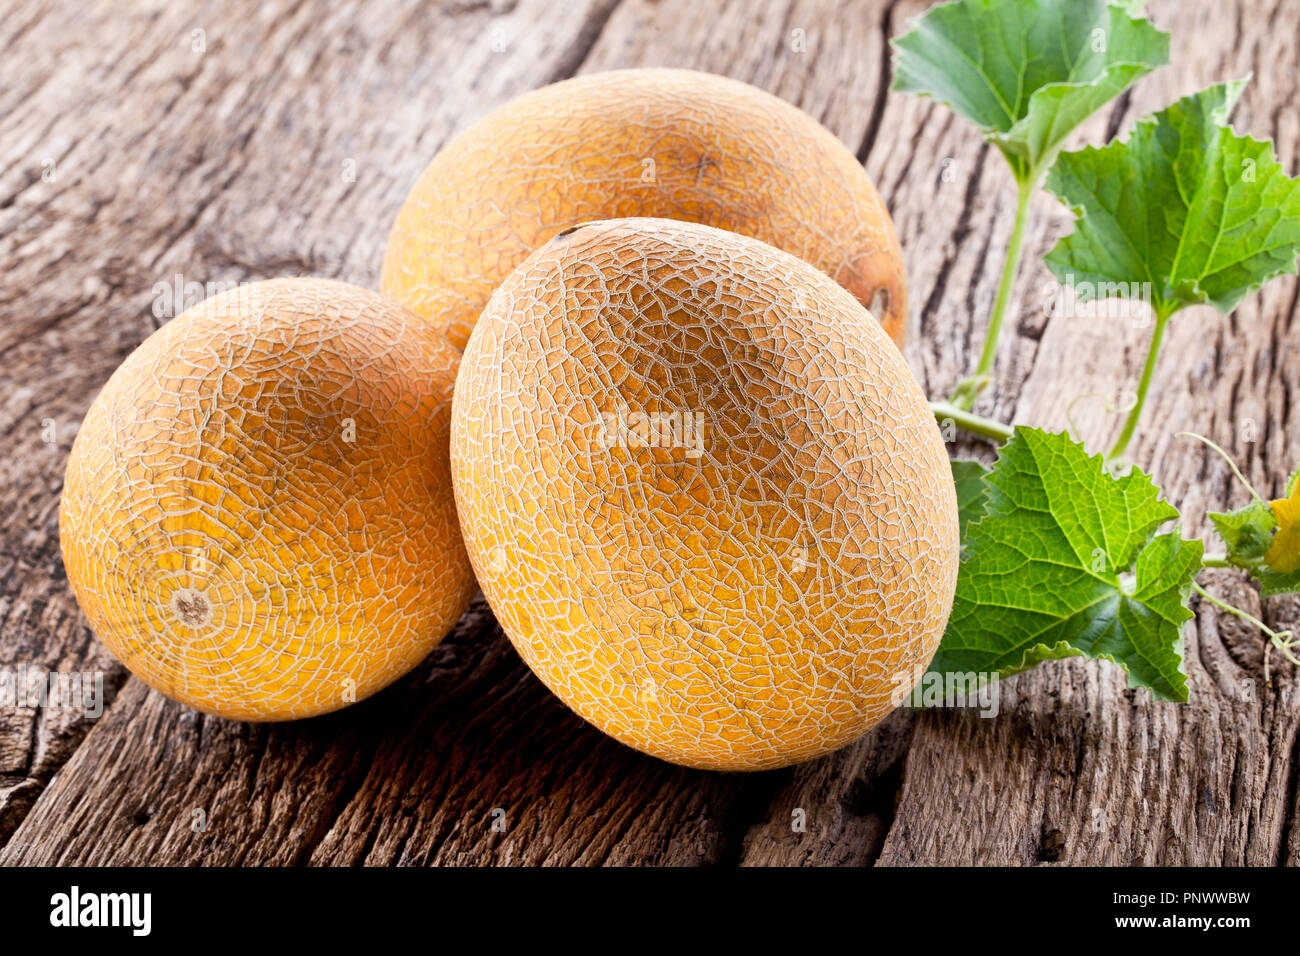 Ripes melons with melon leaves on wooden background. Stock Photo